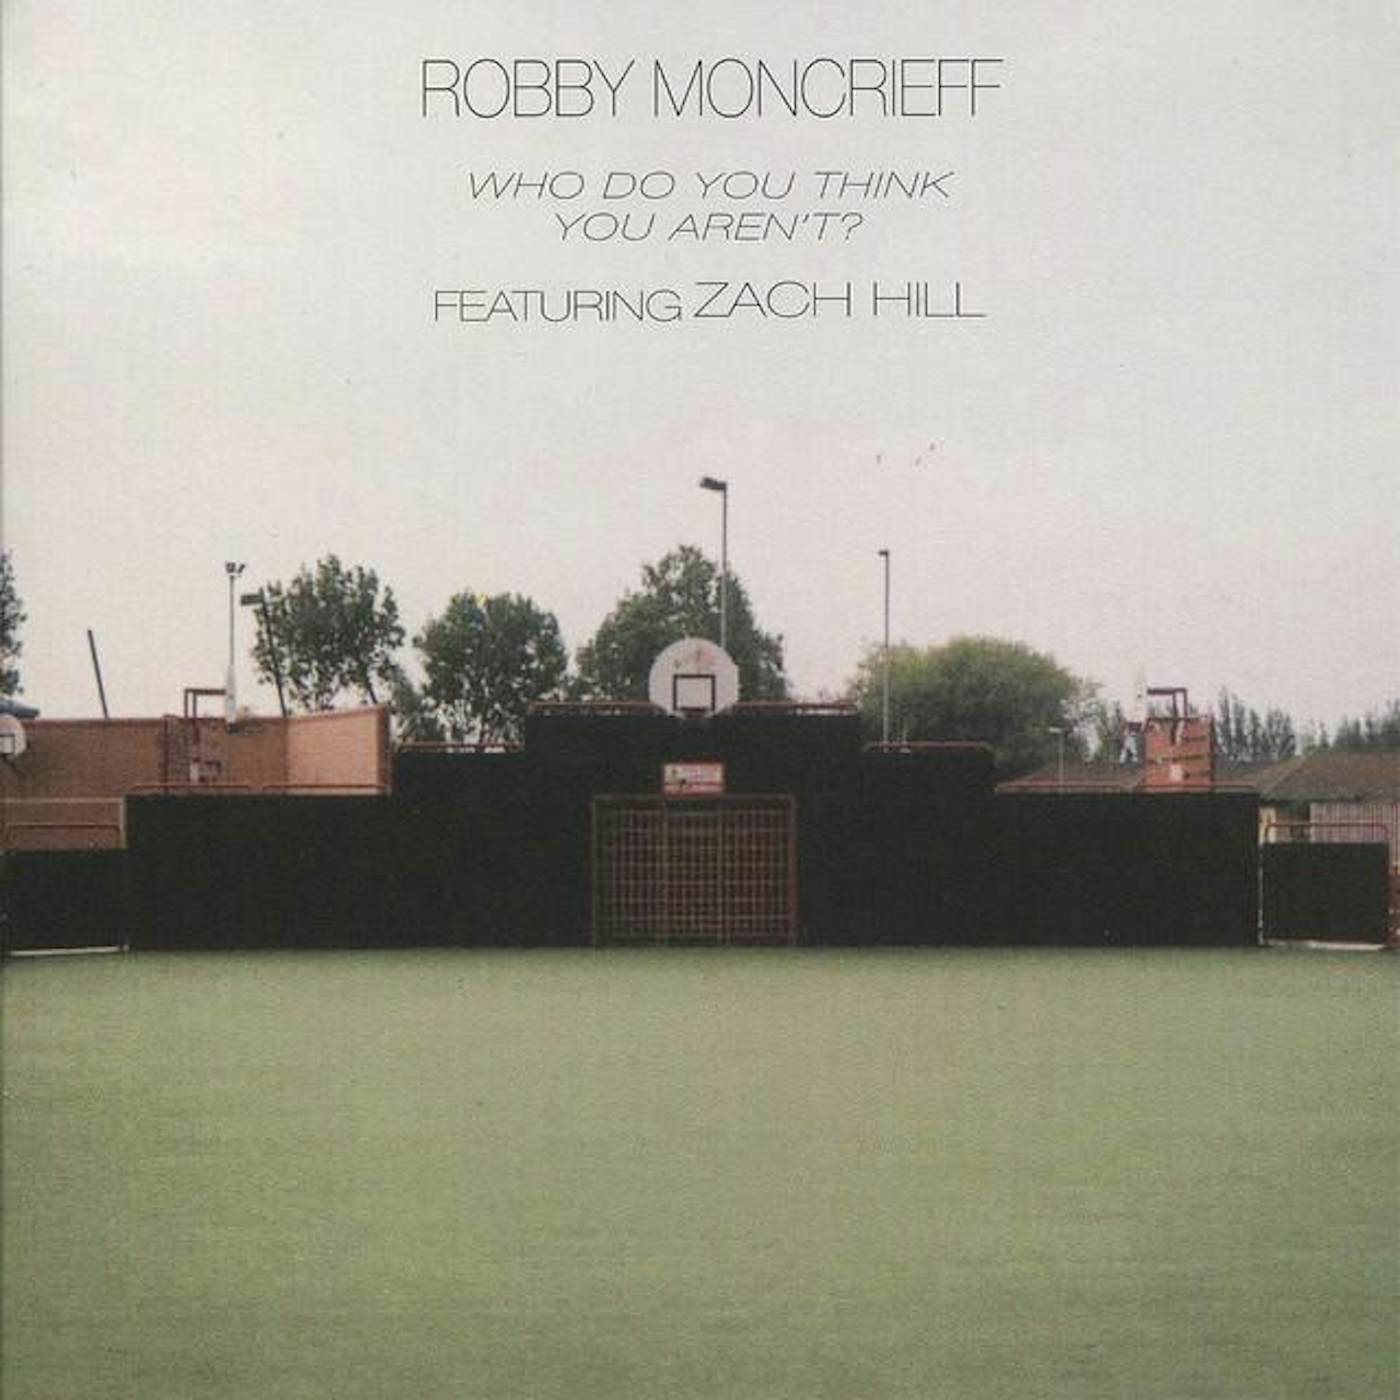 Robby Moncrieff